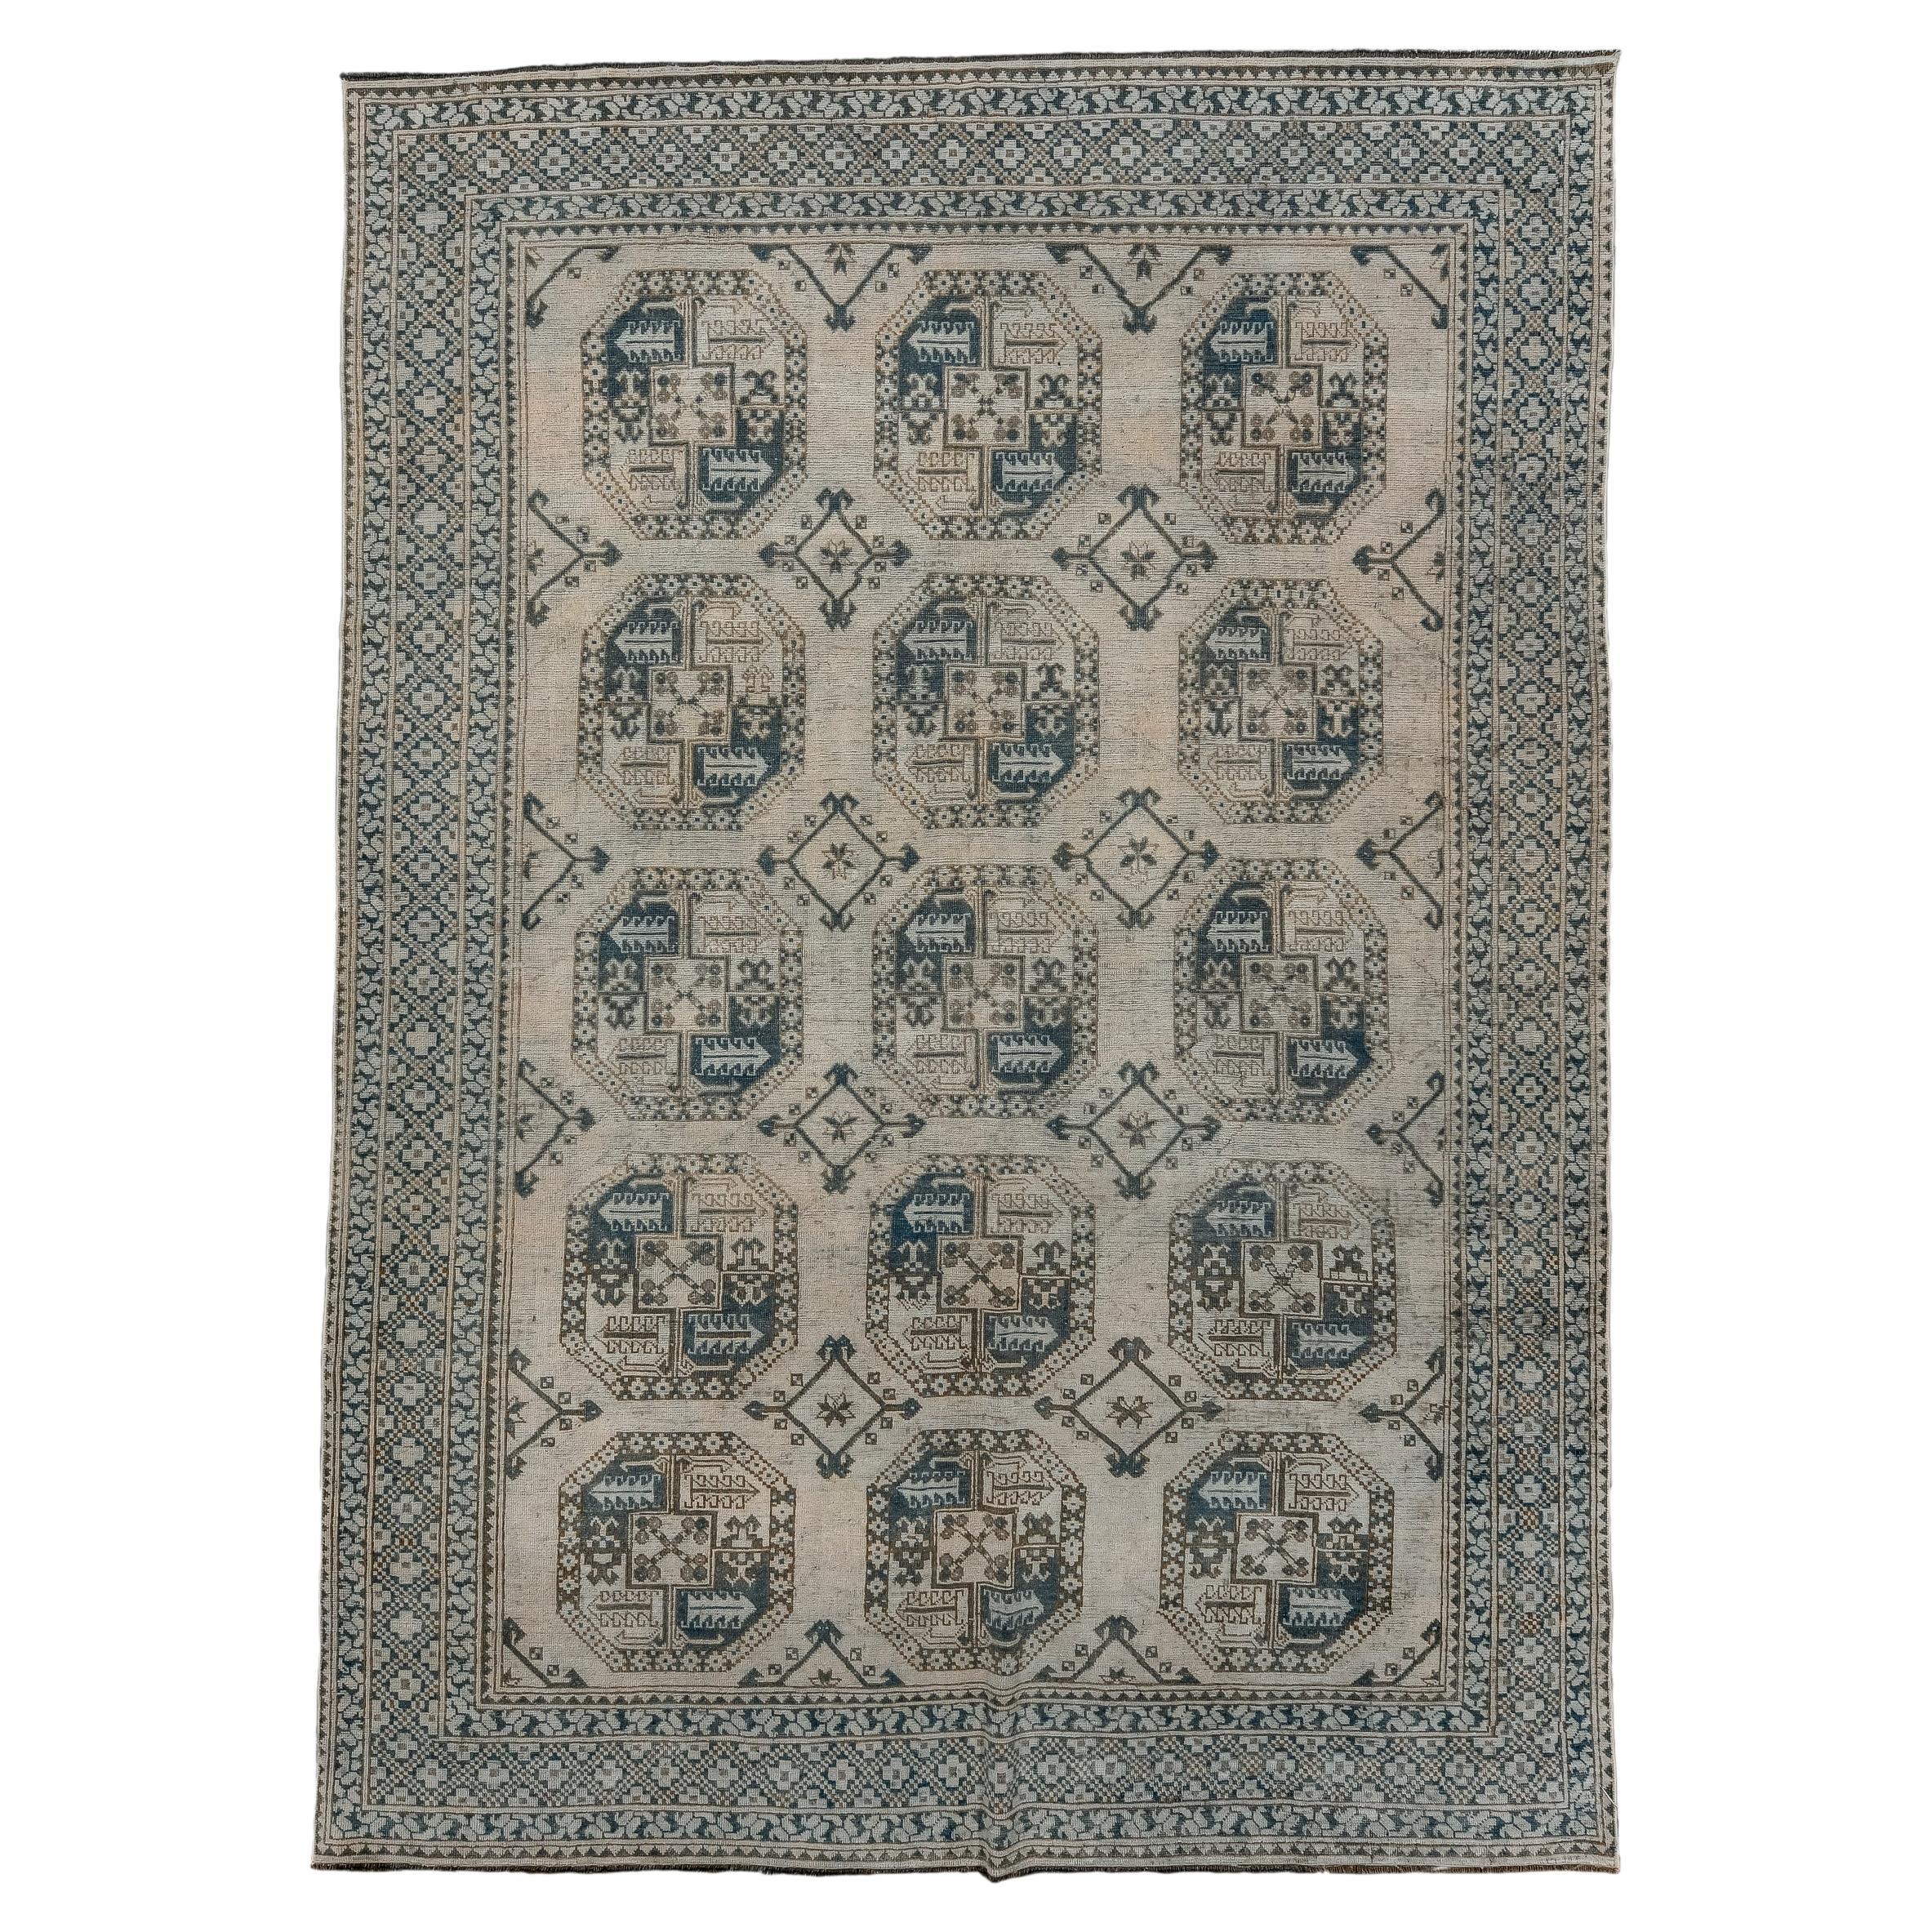 Antique Ersari Rug with Brown and Blue Details and Diamond Border